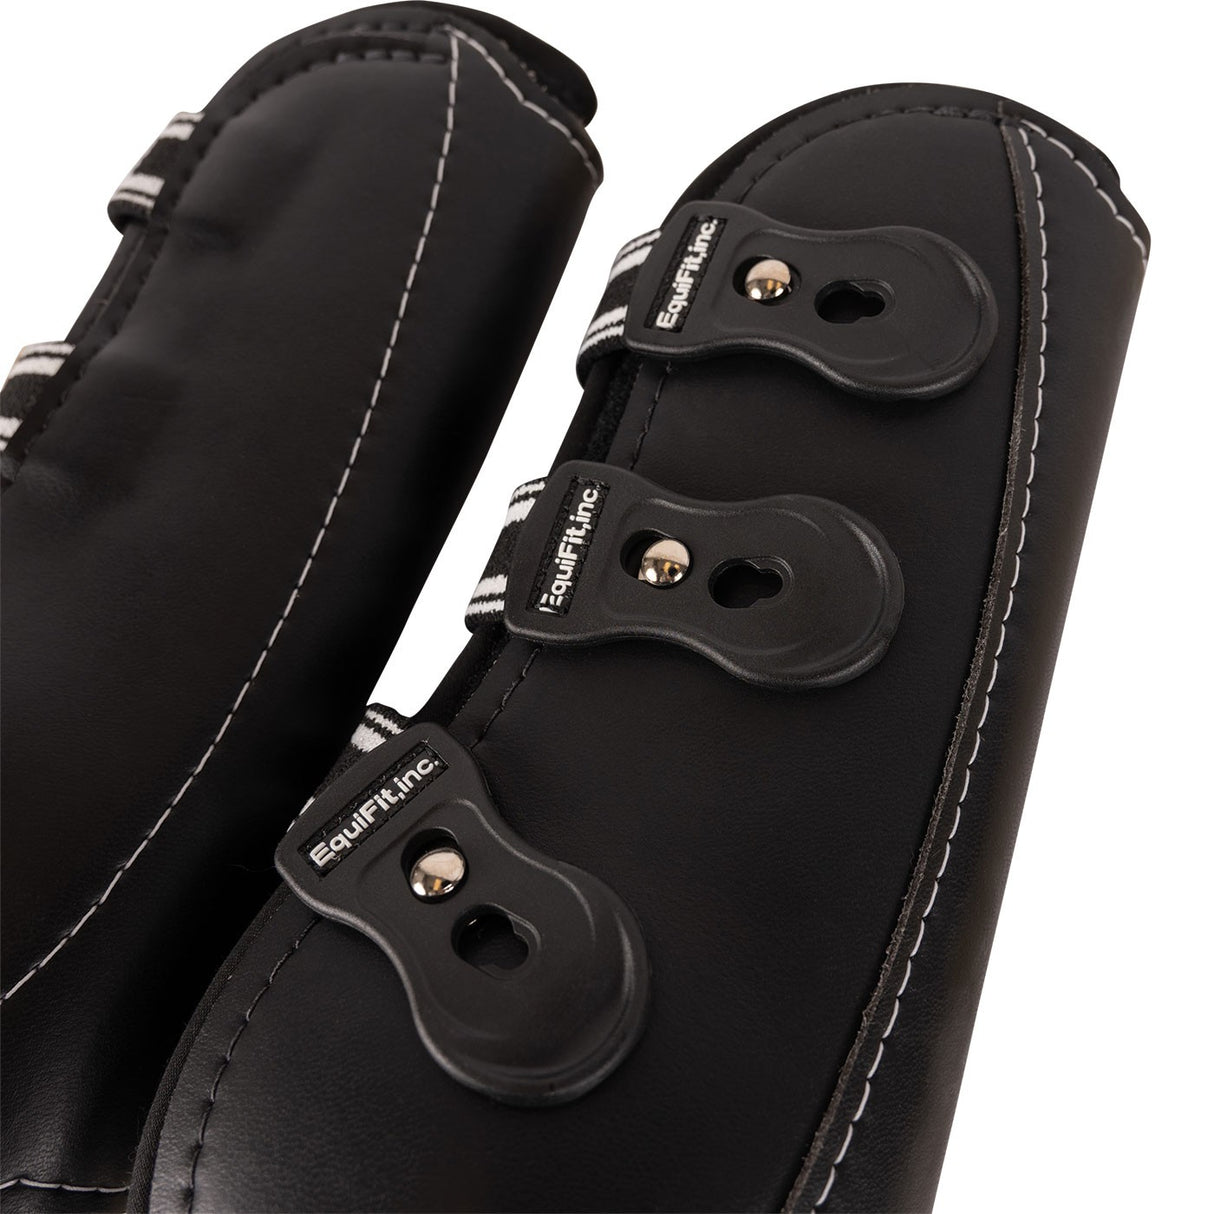 EquiFit EXP3 Front Boots W/ Tab Closure